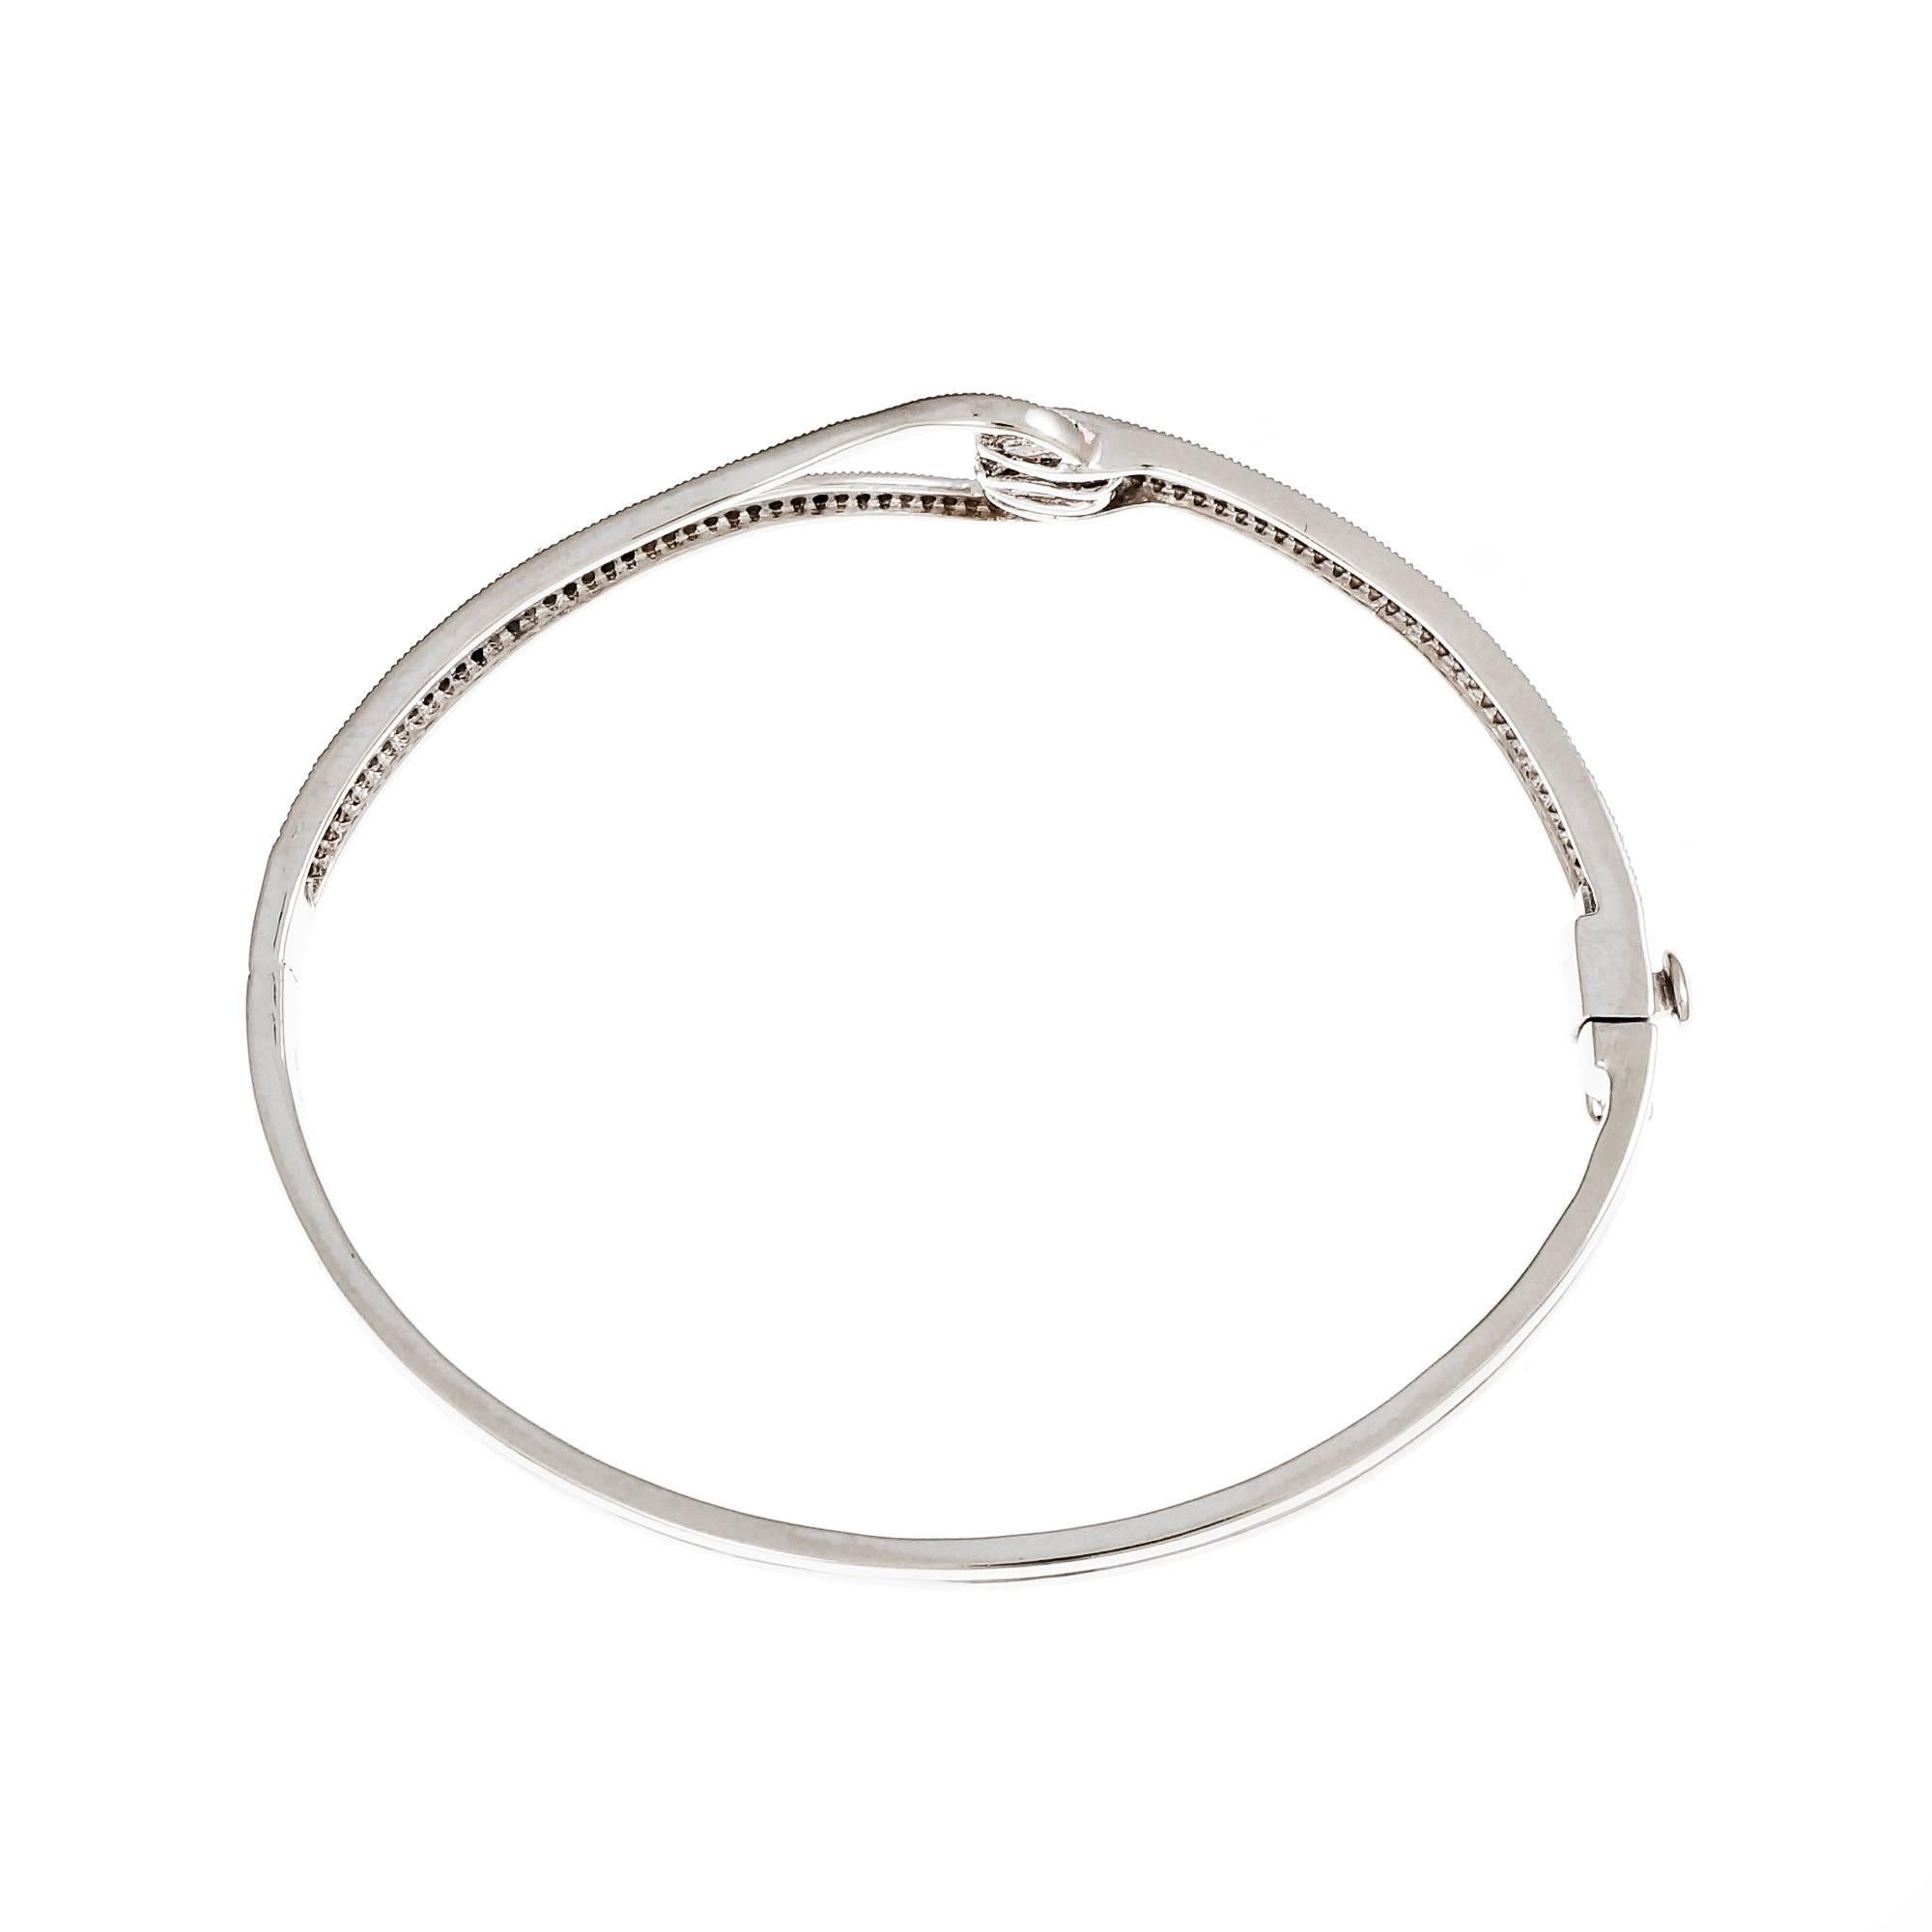 Estate hinged bangle bracelet micro pavé set with bright single cut Diamonds. Built in catch with side lock safety.

14k white gold
161 single cut Diamonds, approx. total weight .85cts, H – I, VS – SI
Width at top: 11.47mm
Height at top: